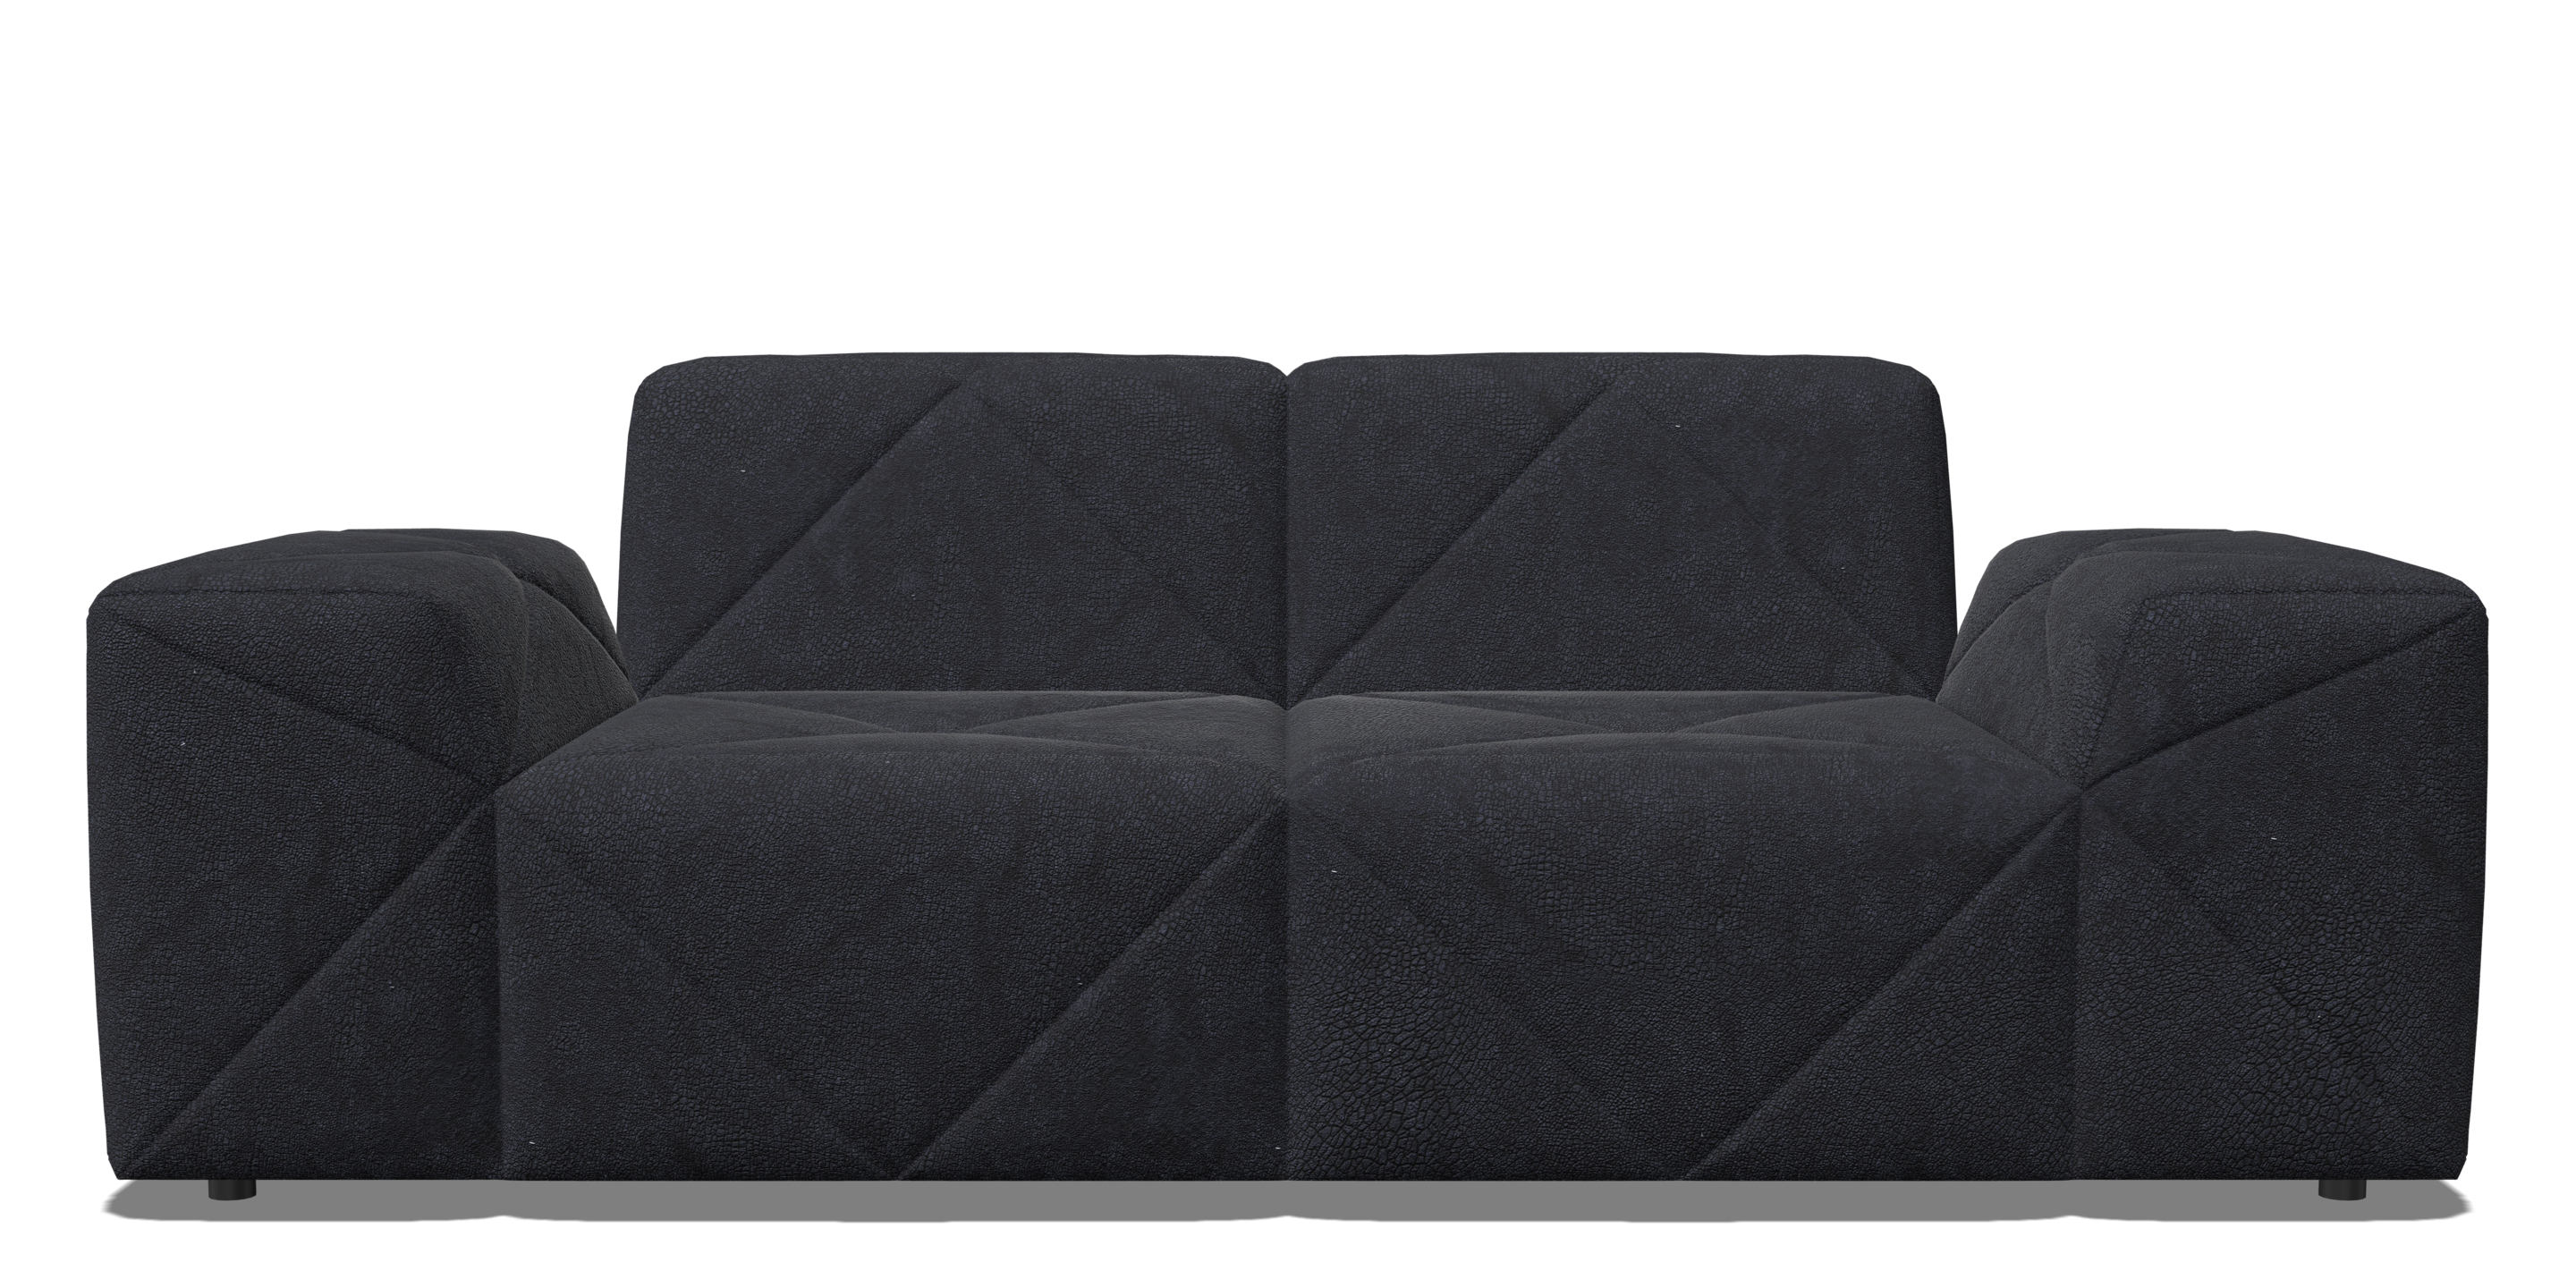 BFF sofa double seater low armrest front view black